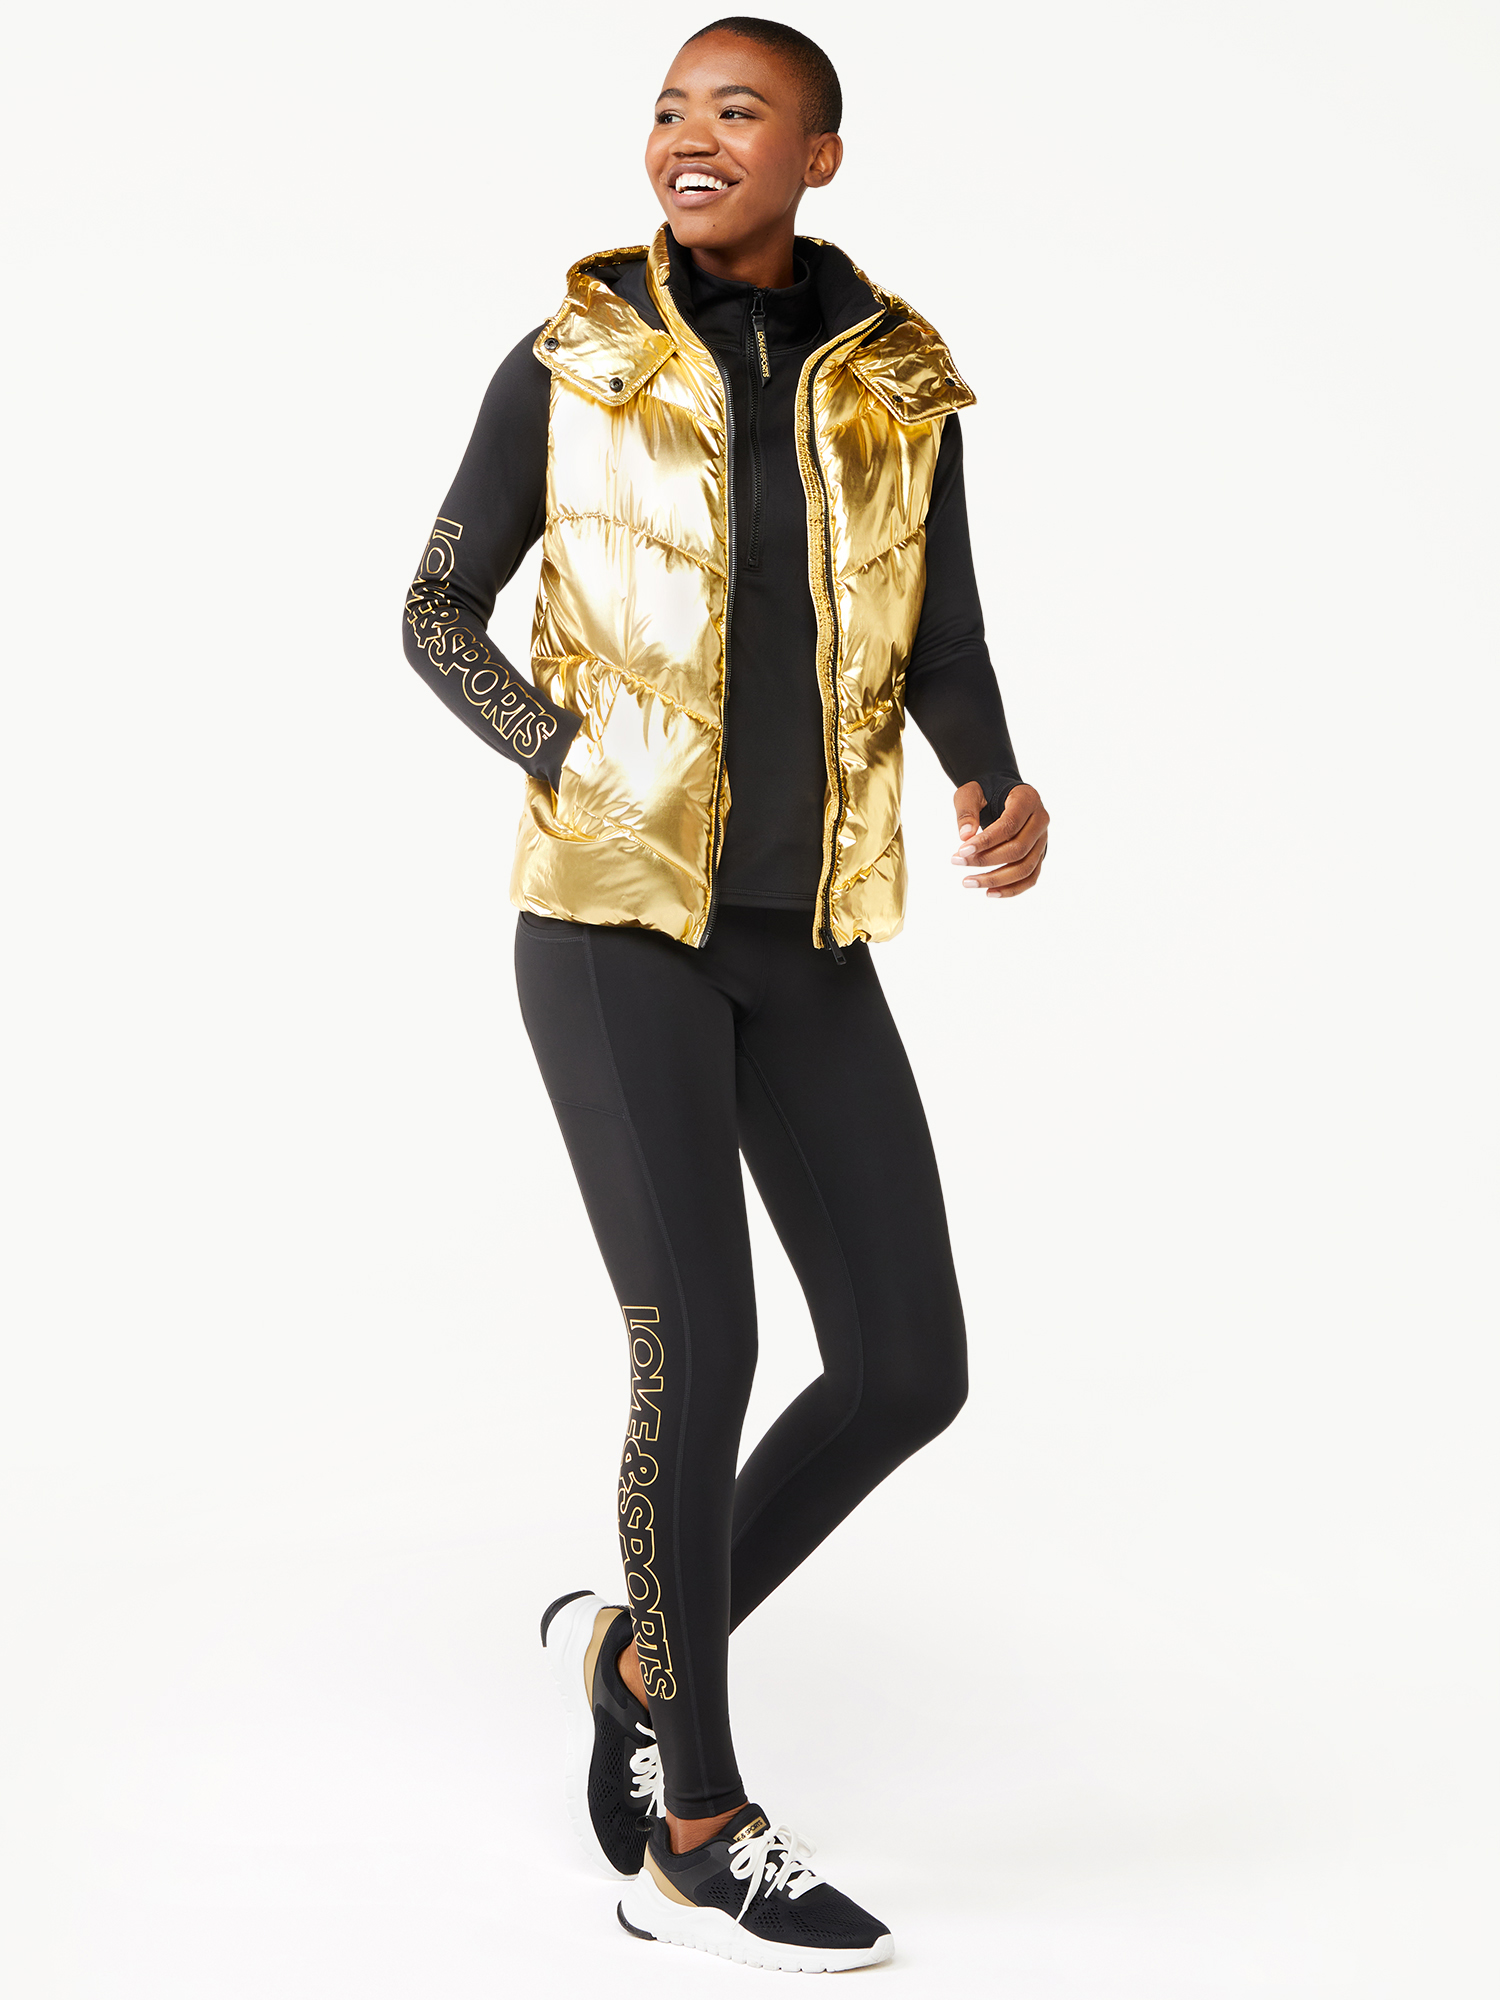 Love & Sports Women's Gold Foil Puffer Vest with Hood - image 3 of 7